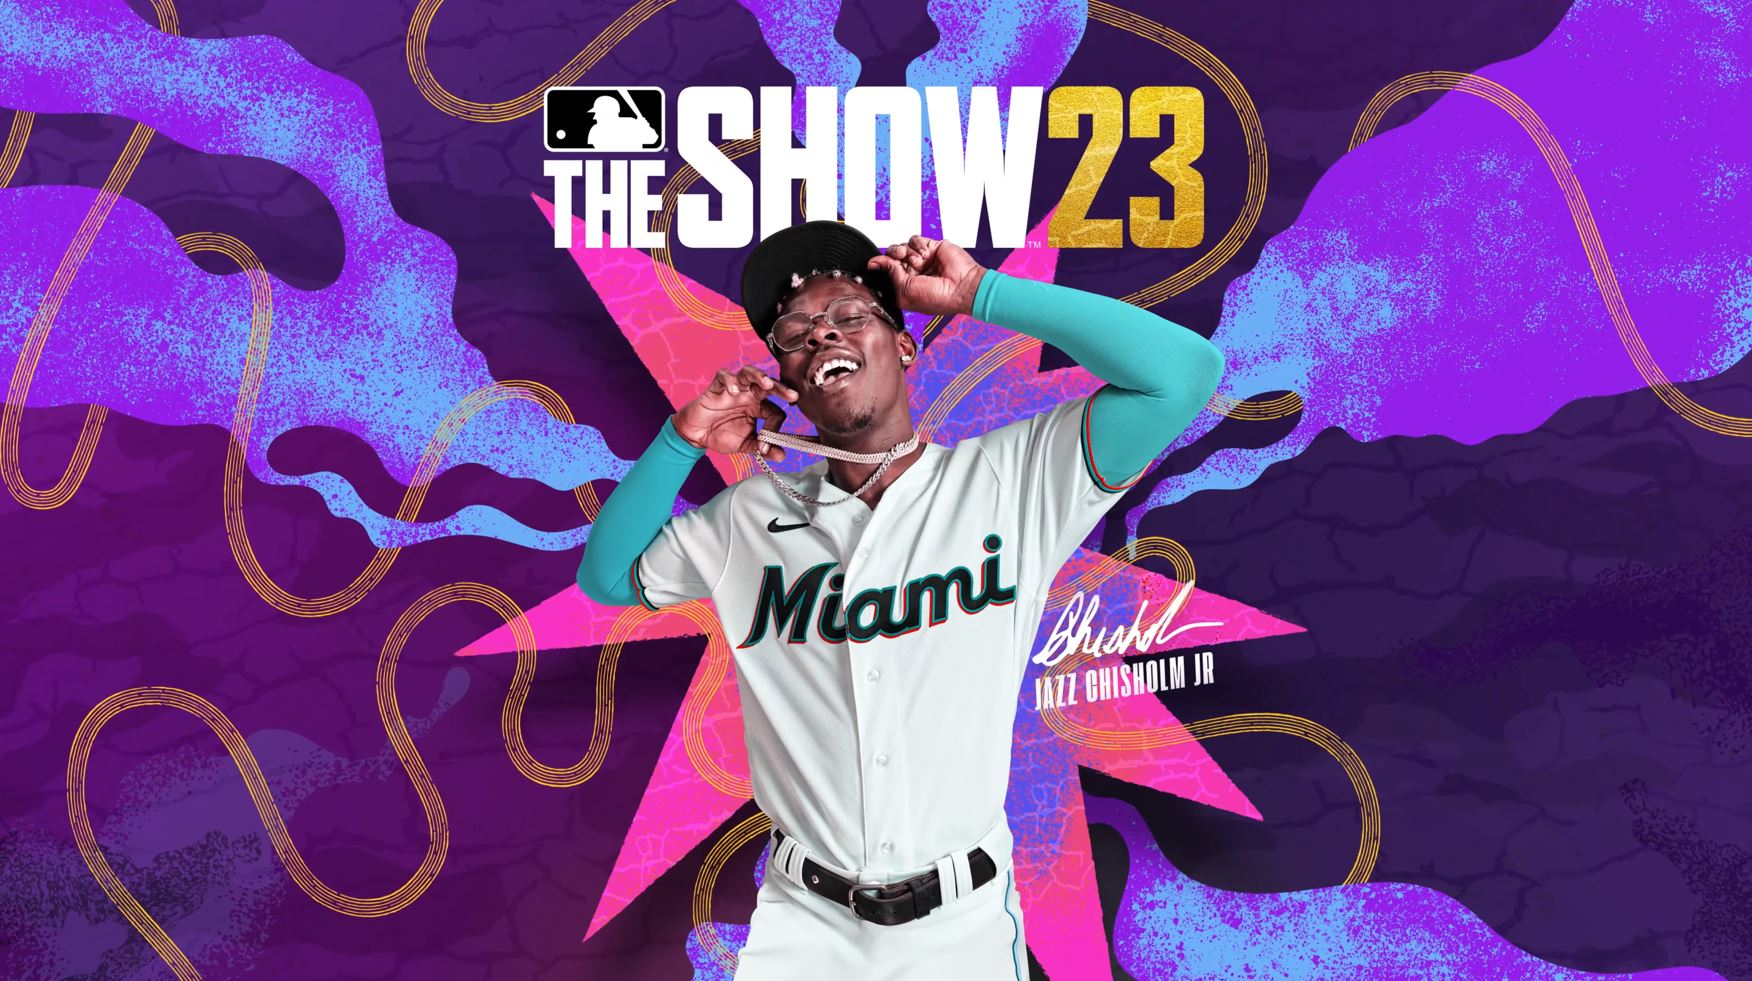 MLB The Show returns to PlayStation, Xbox, and Switch this March